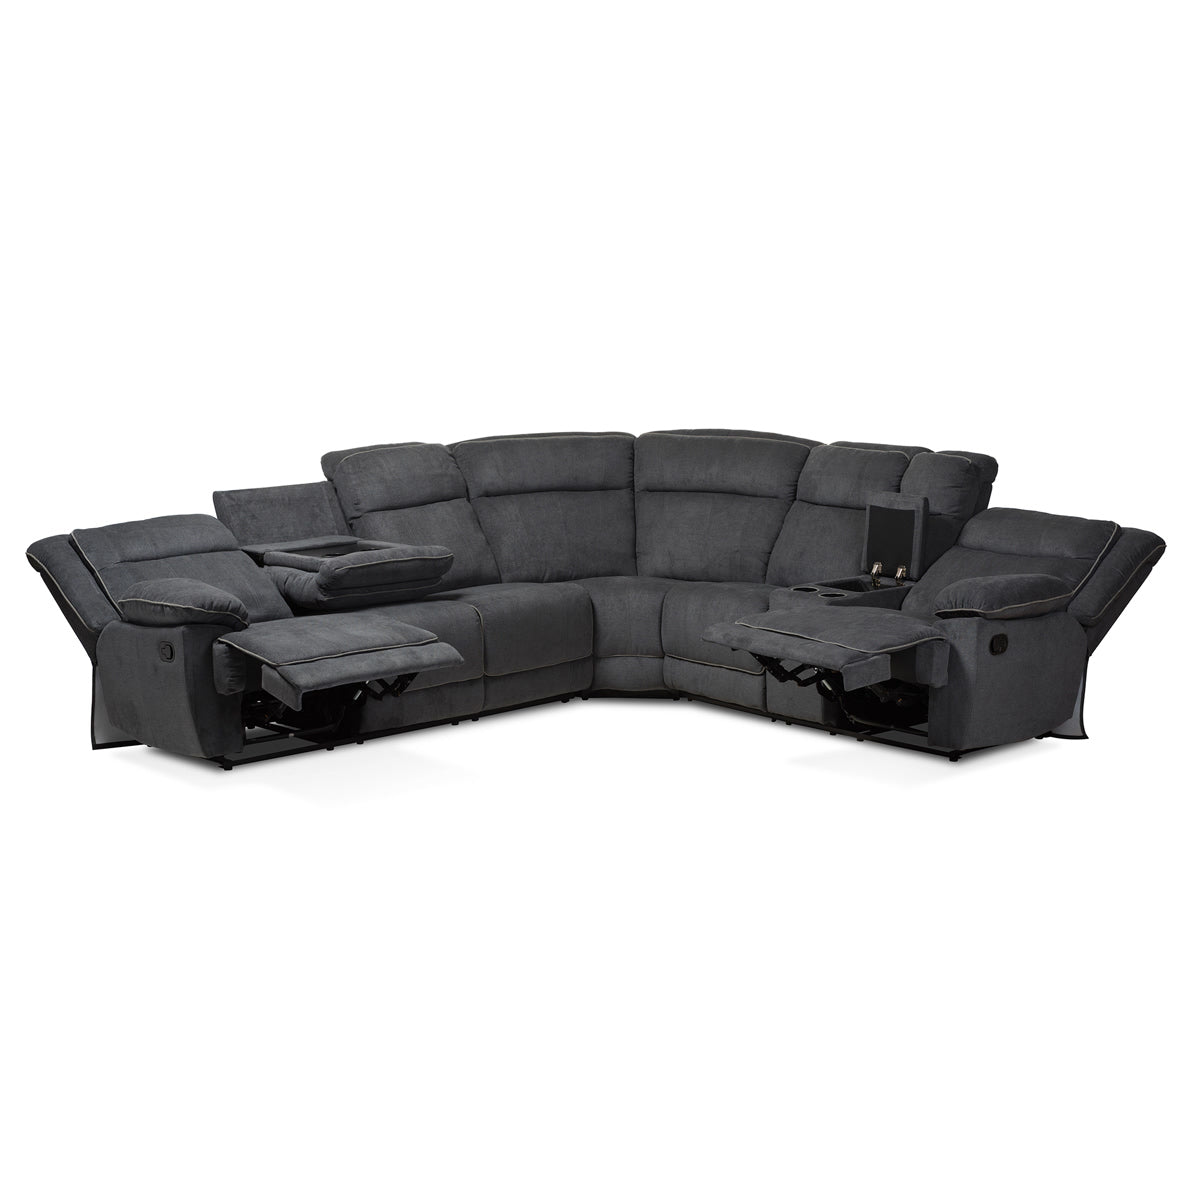 Baxton Studio Sabella Modern and Contemporary Dark Grey and Light Grey Two-Tone Fabric 7-Piece Reclining Sectional Baxton Studio-sofas-Minimal And Modern - 5